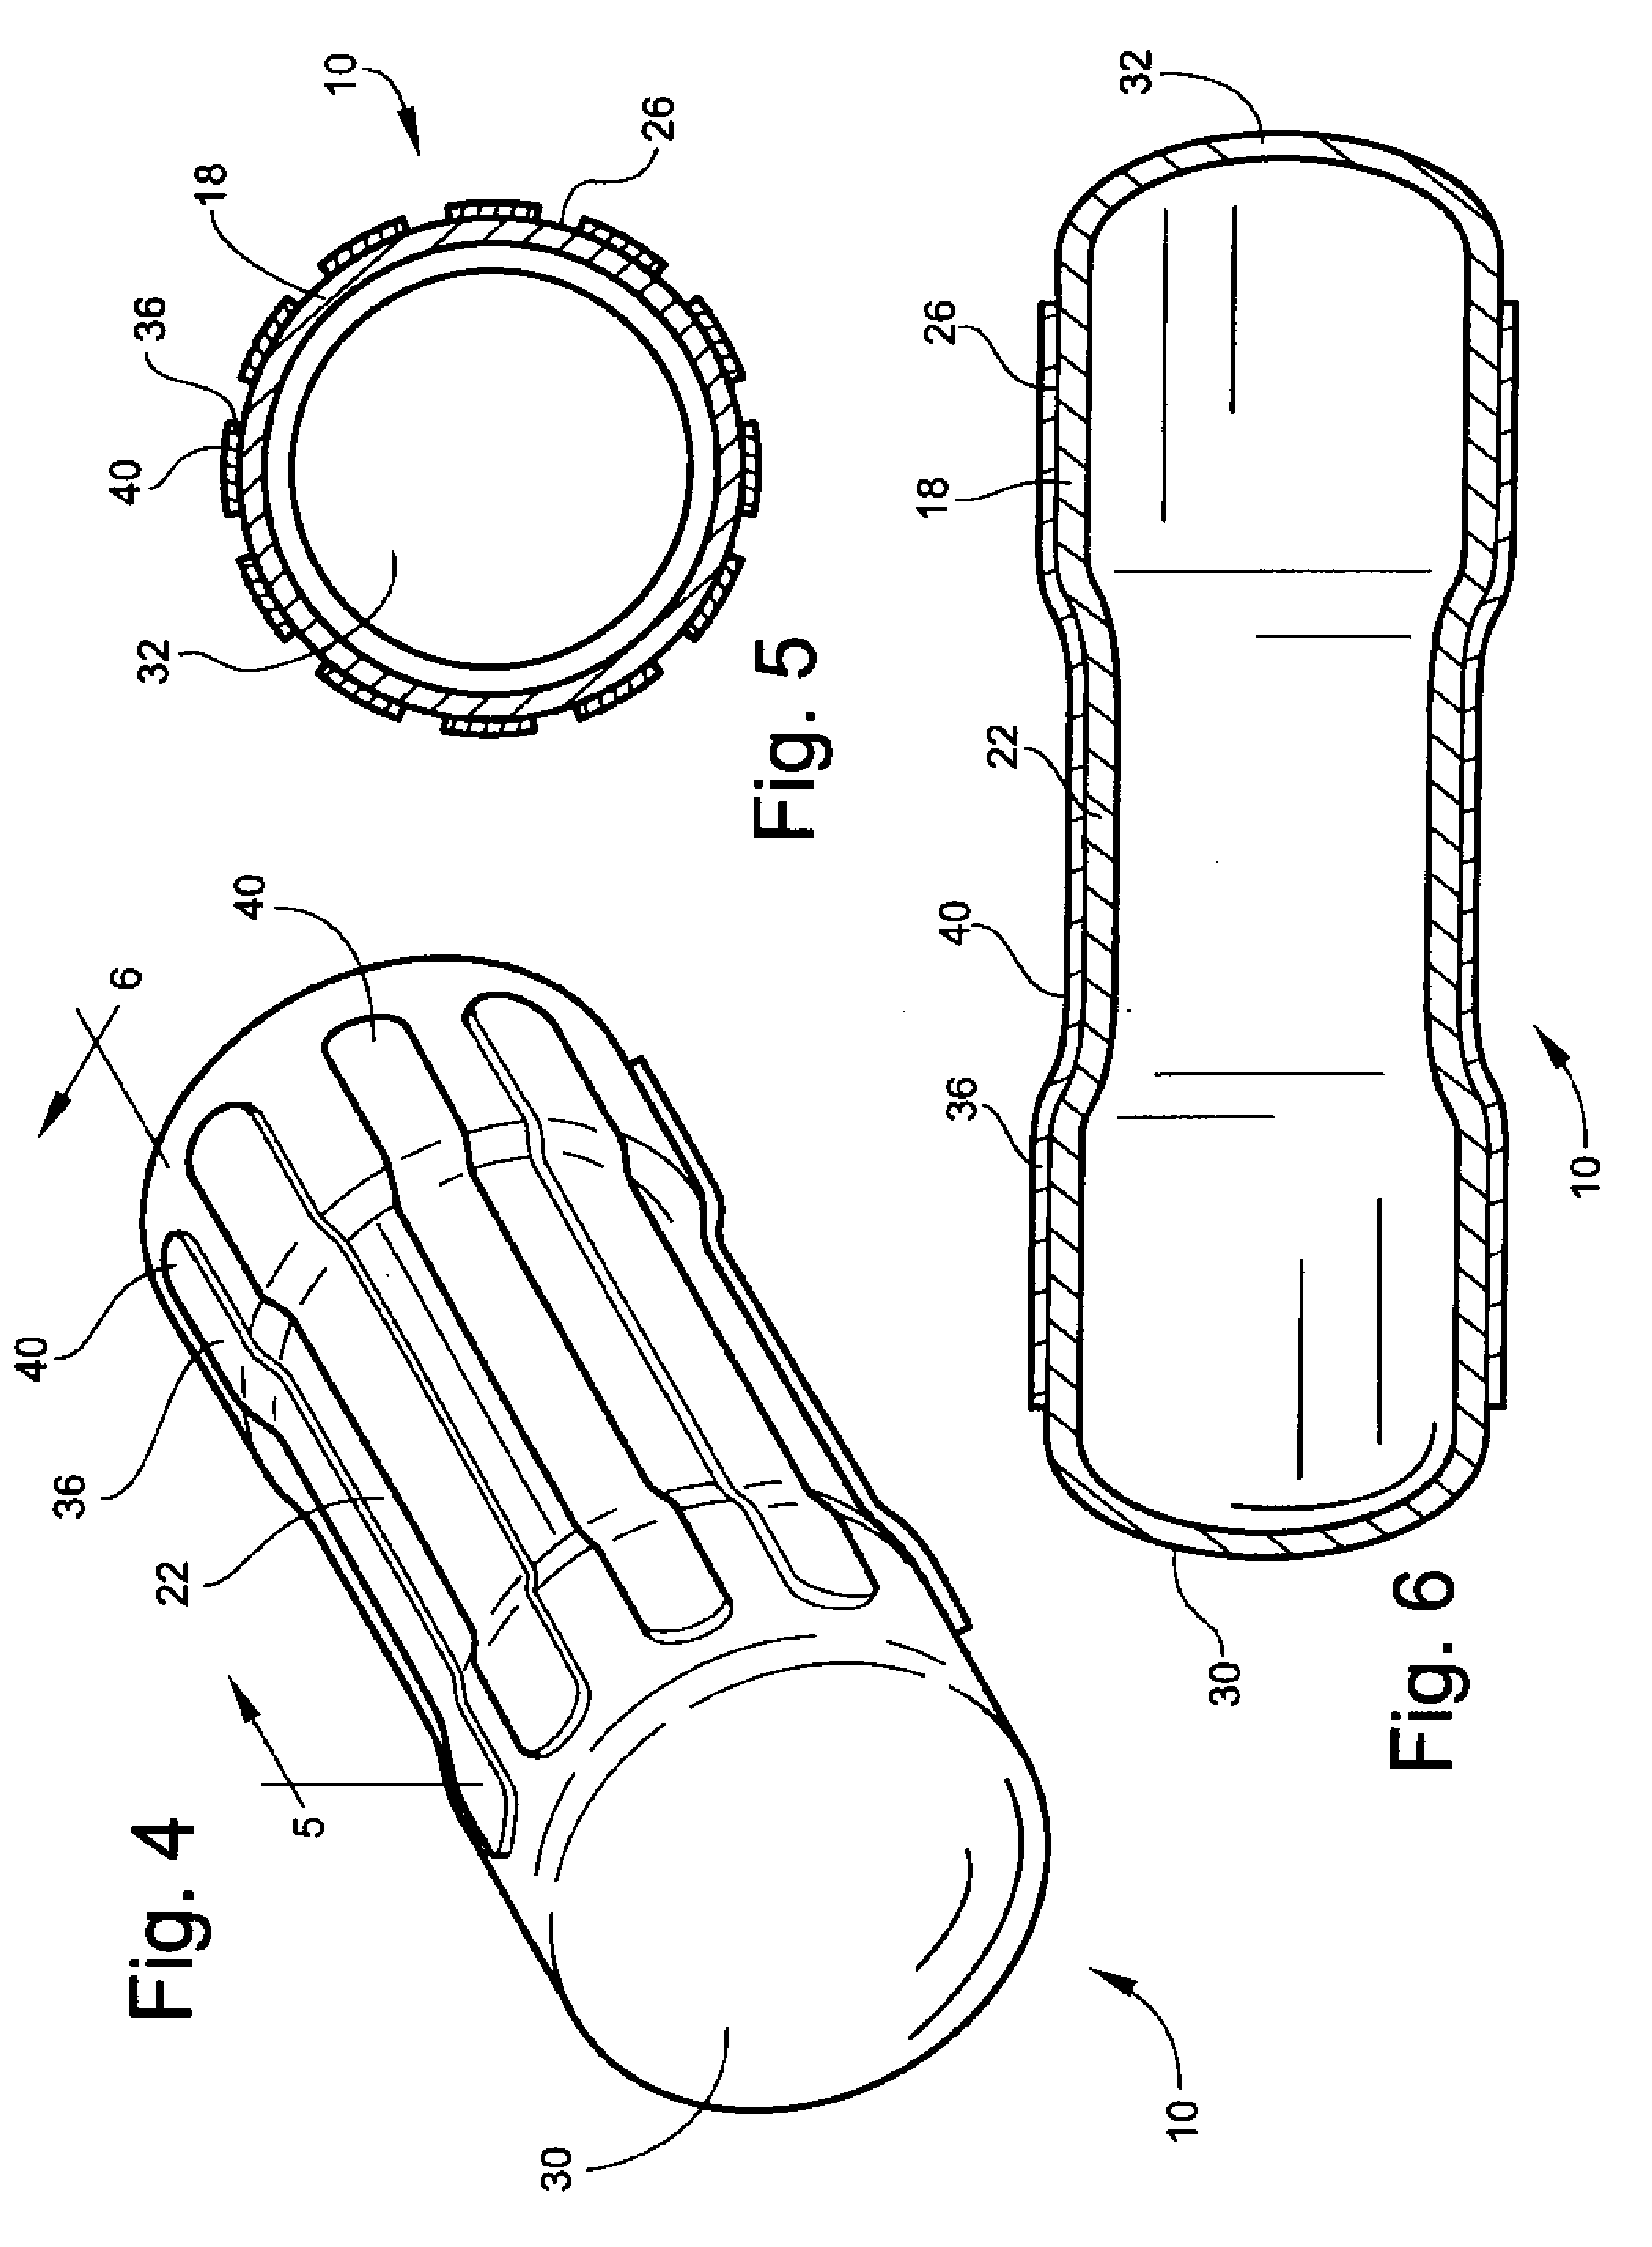 Breast support device